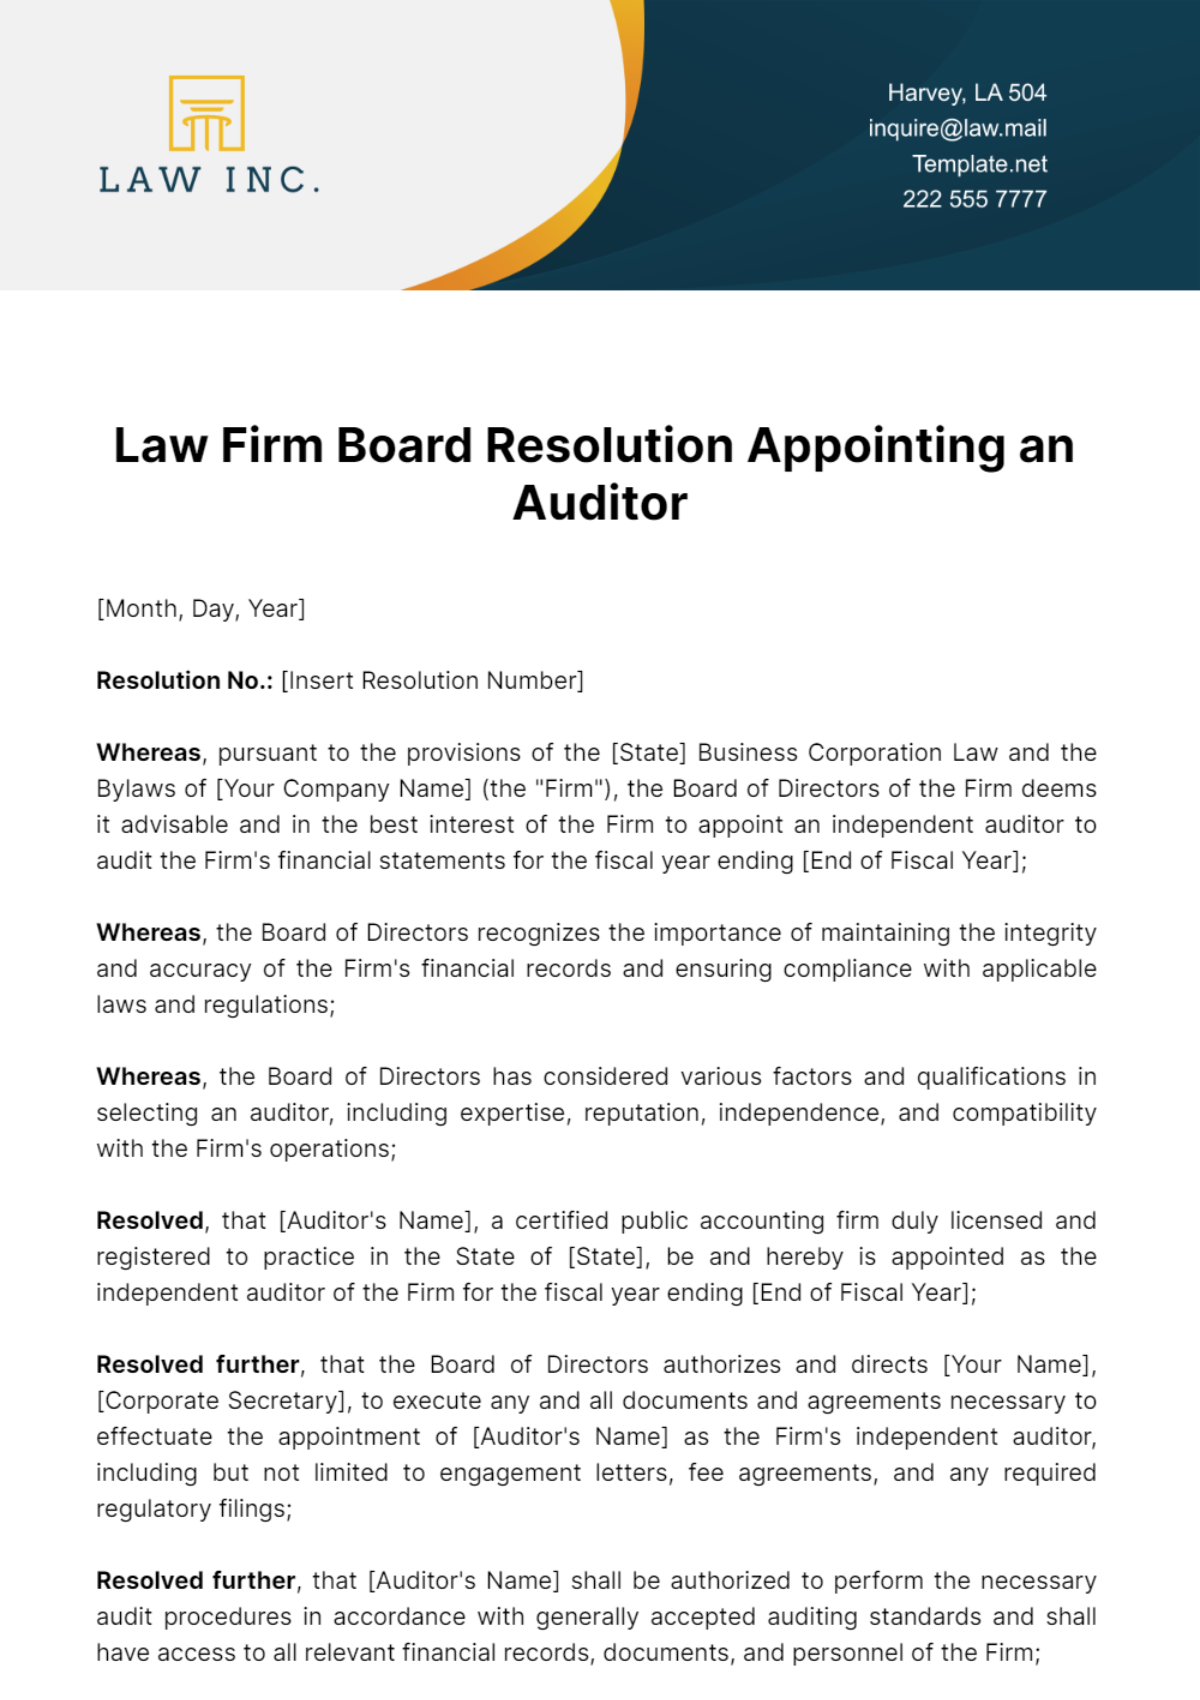 Law Firm Board Resolution Appointing an Auditor Template